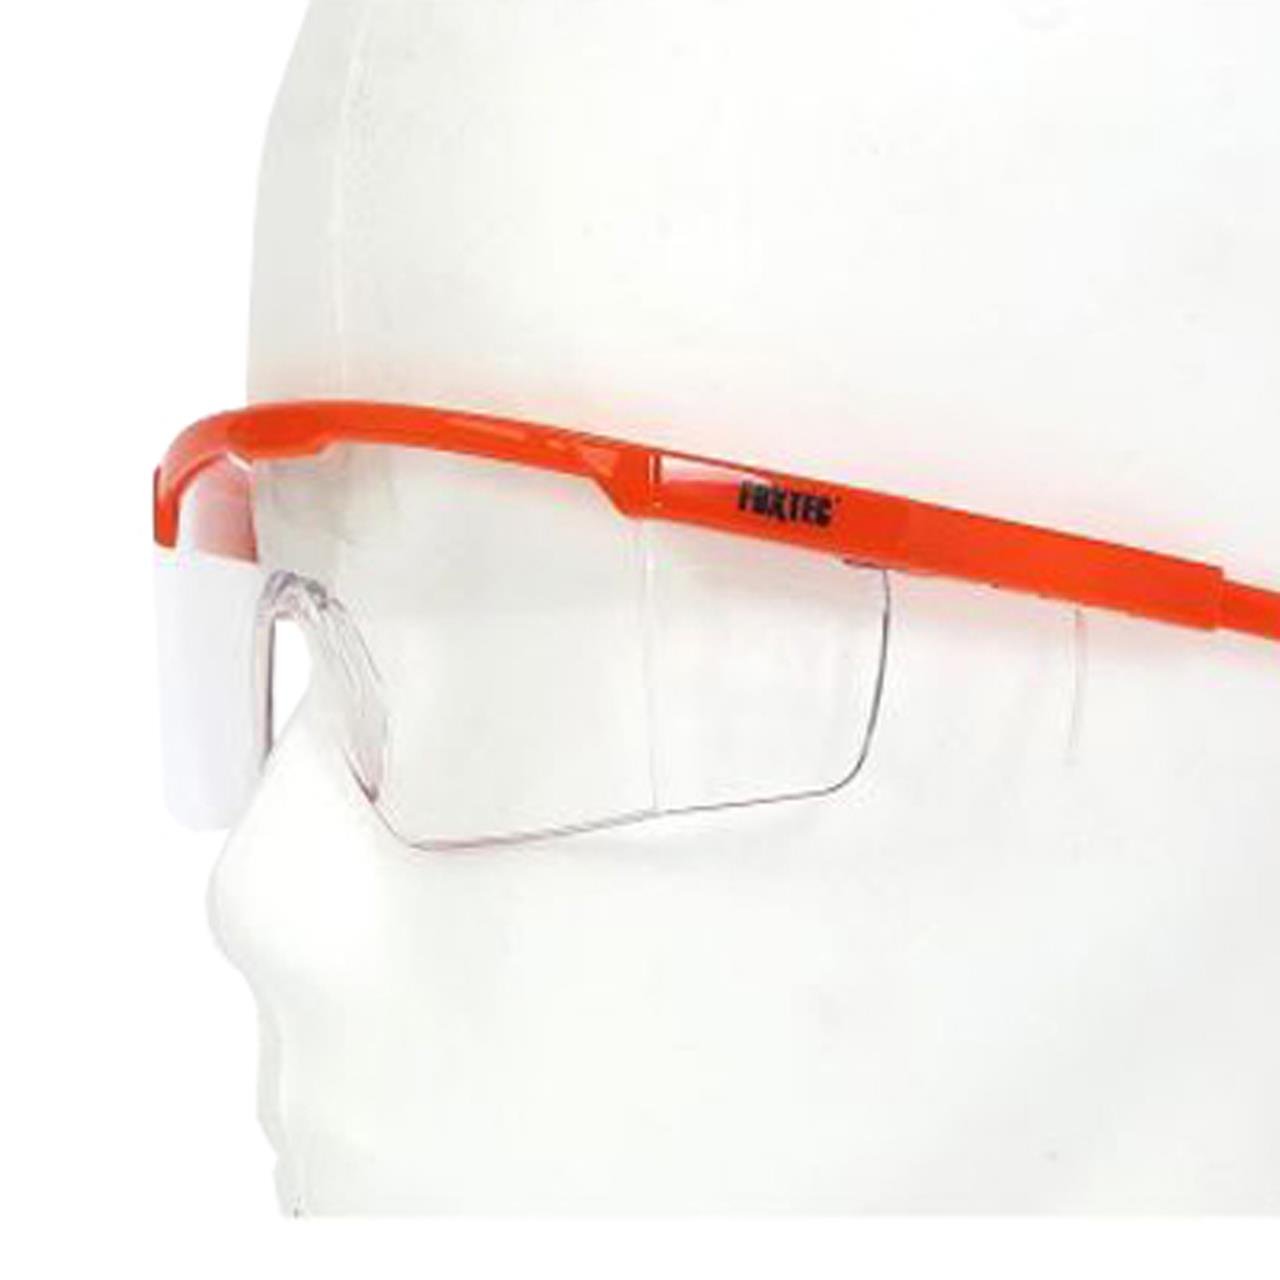 FUXTEC clear safety glasses/goggles